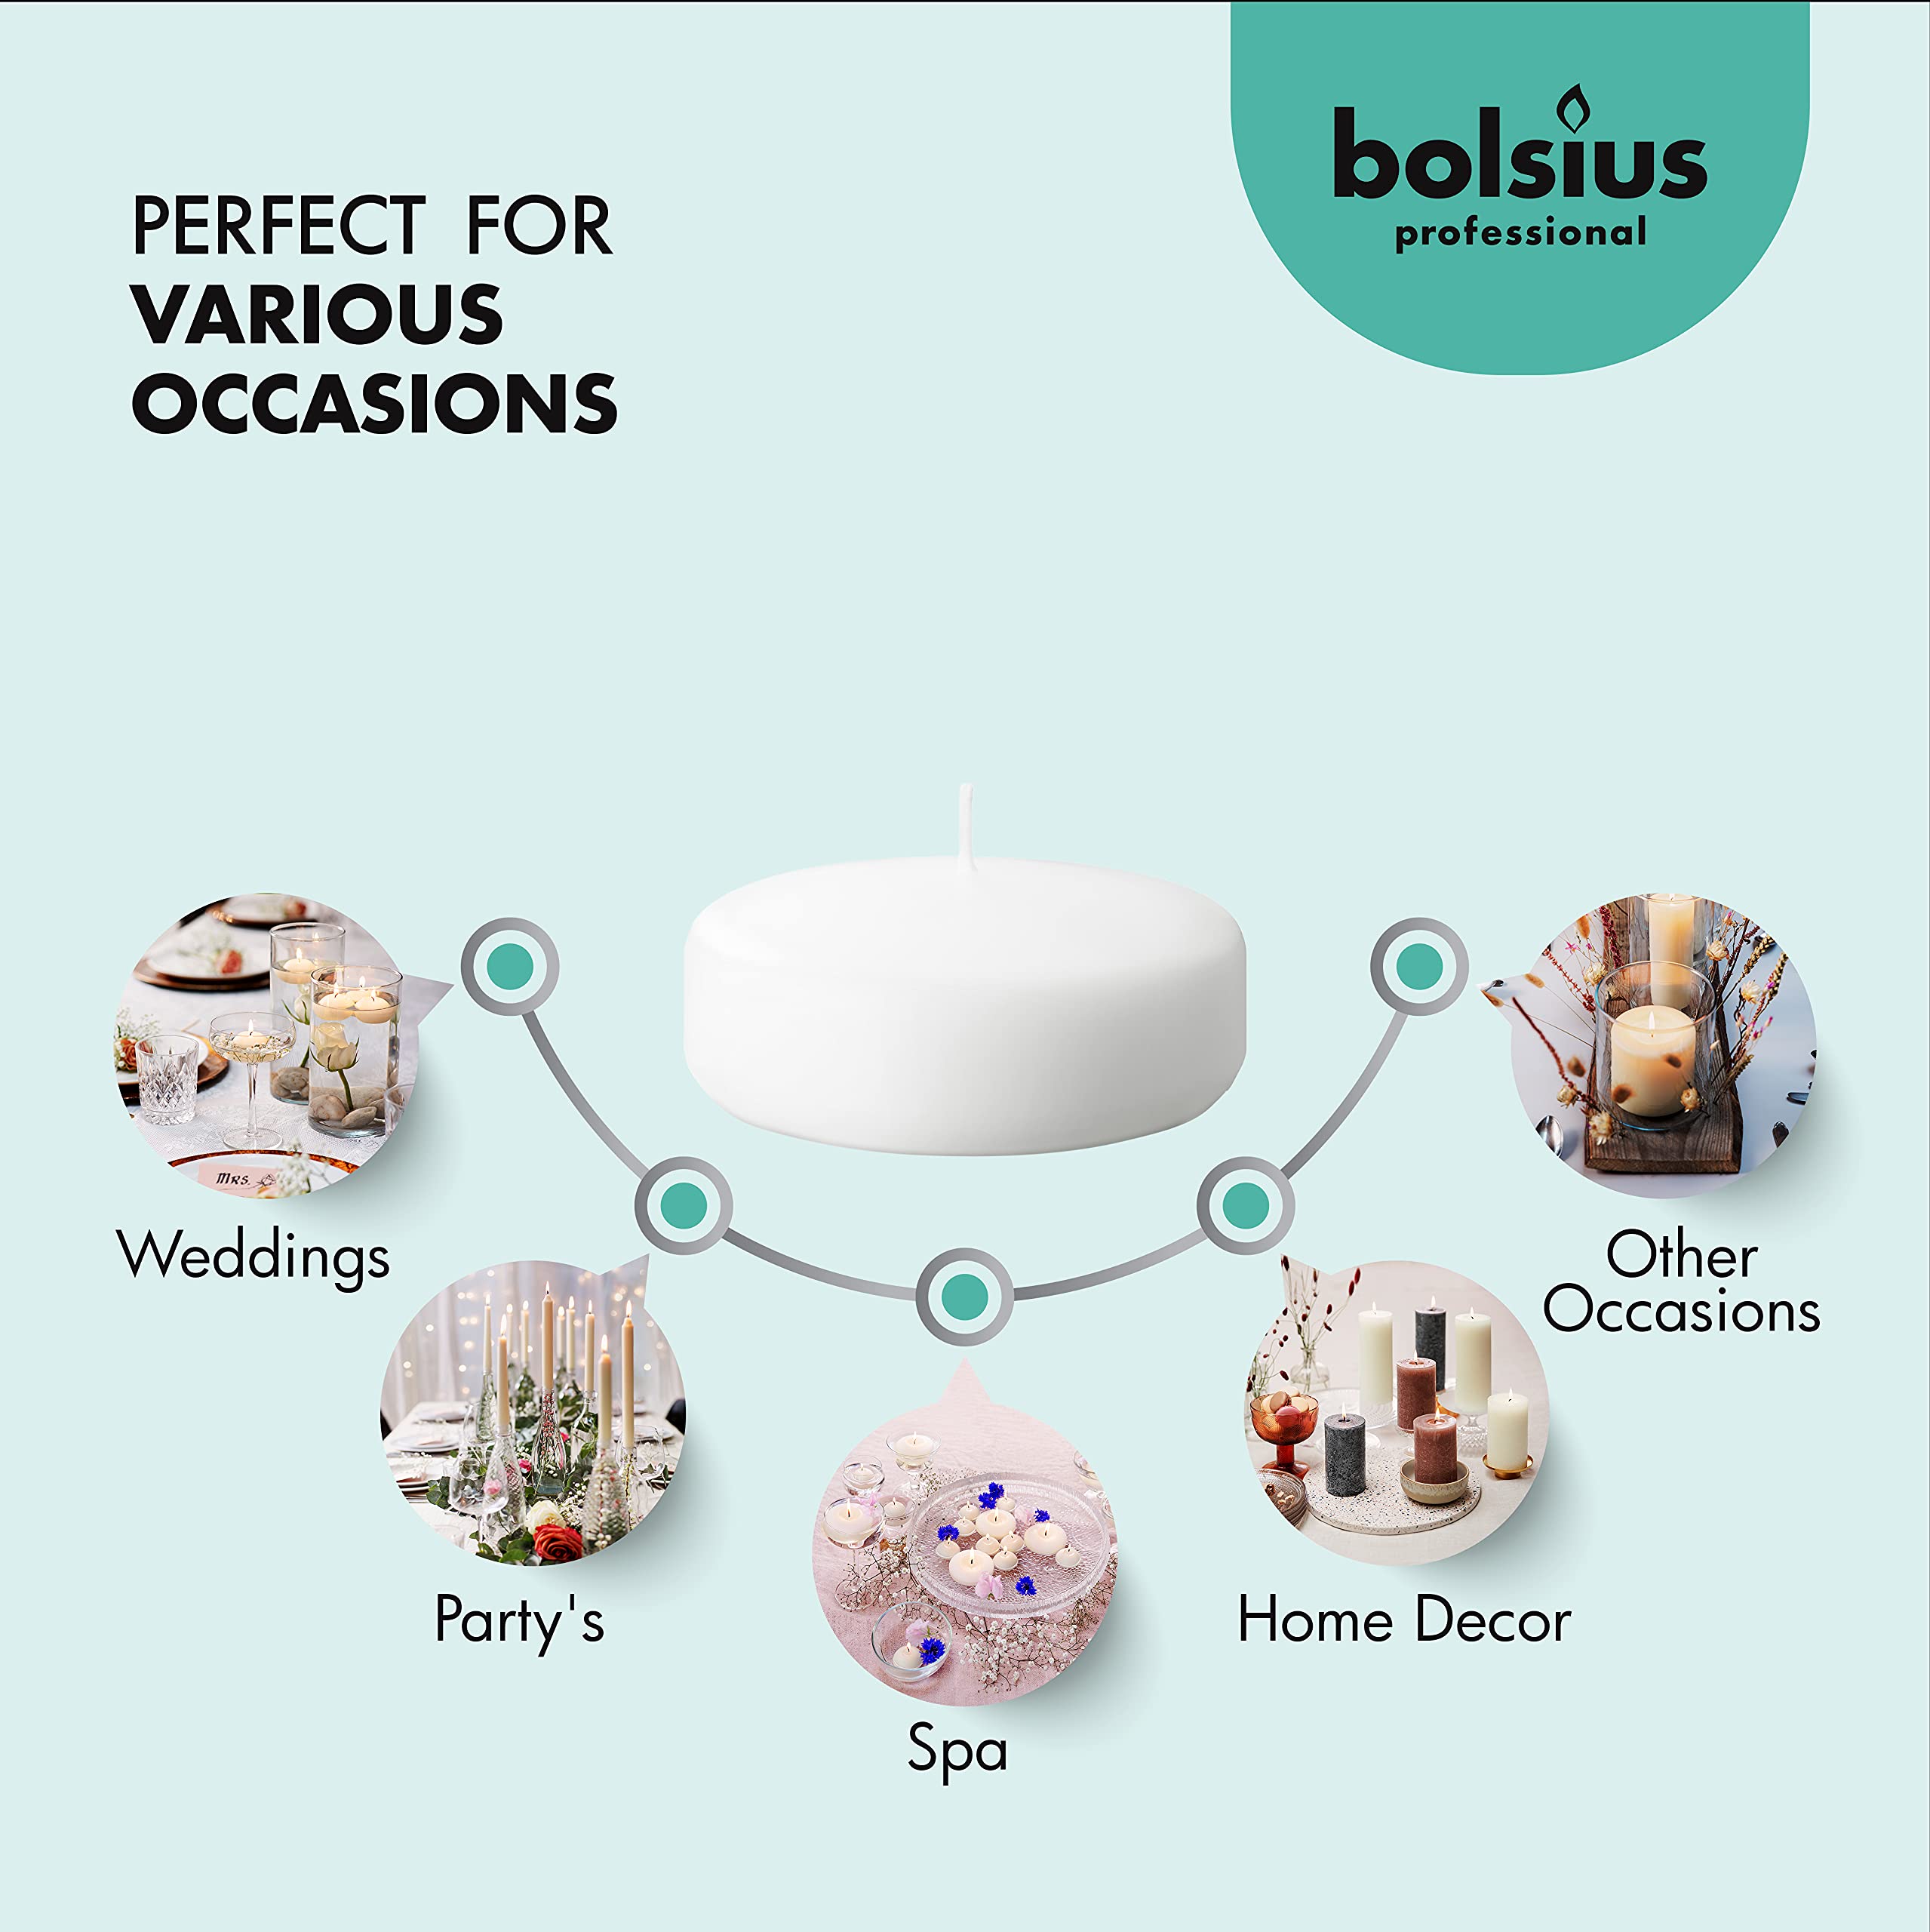 BOLSIUS White Floating Candles 3 Inch - Set Of 12 Maxi Candles - 8 Hour Clean Burning - Palm Oil Free - 0% Animal Fat - Premium European Quality  - Very Good